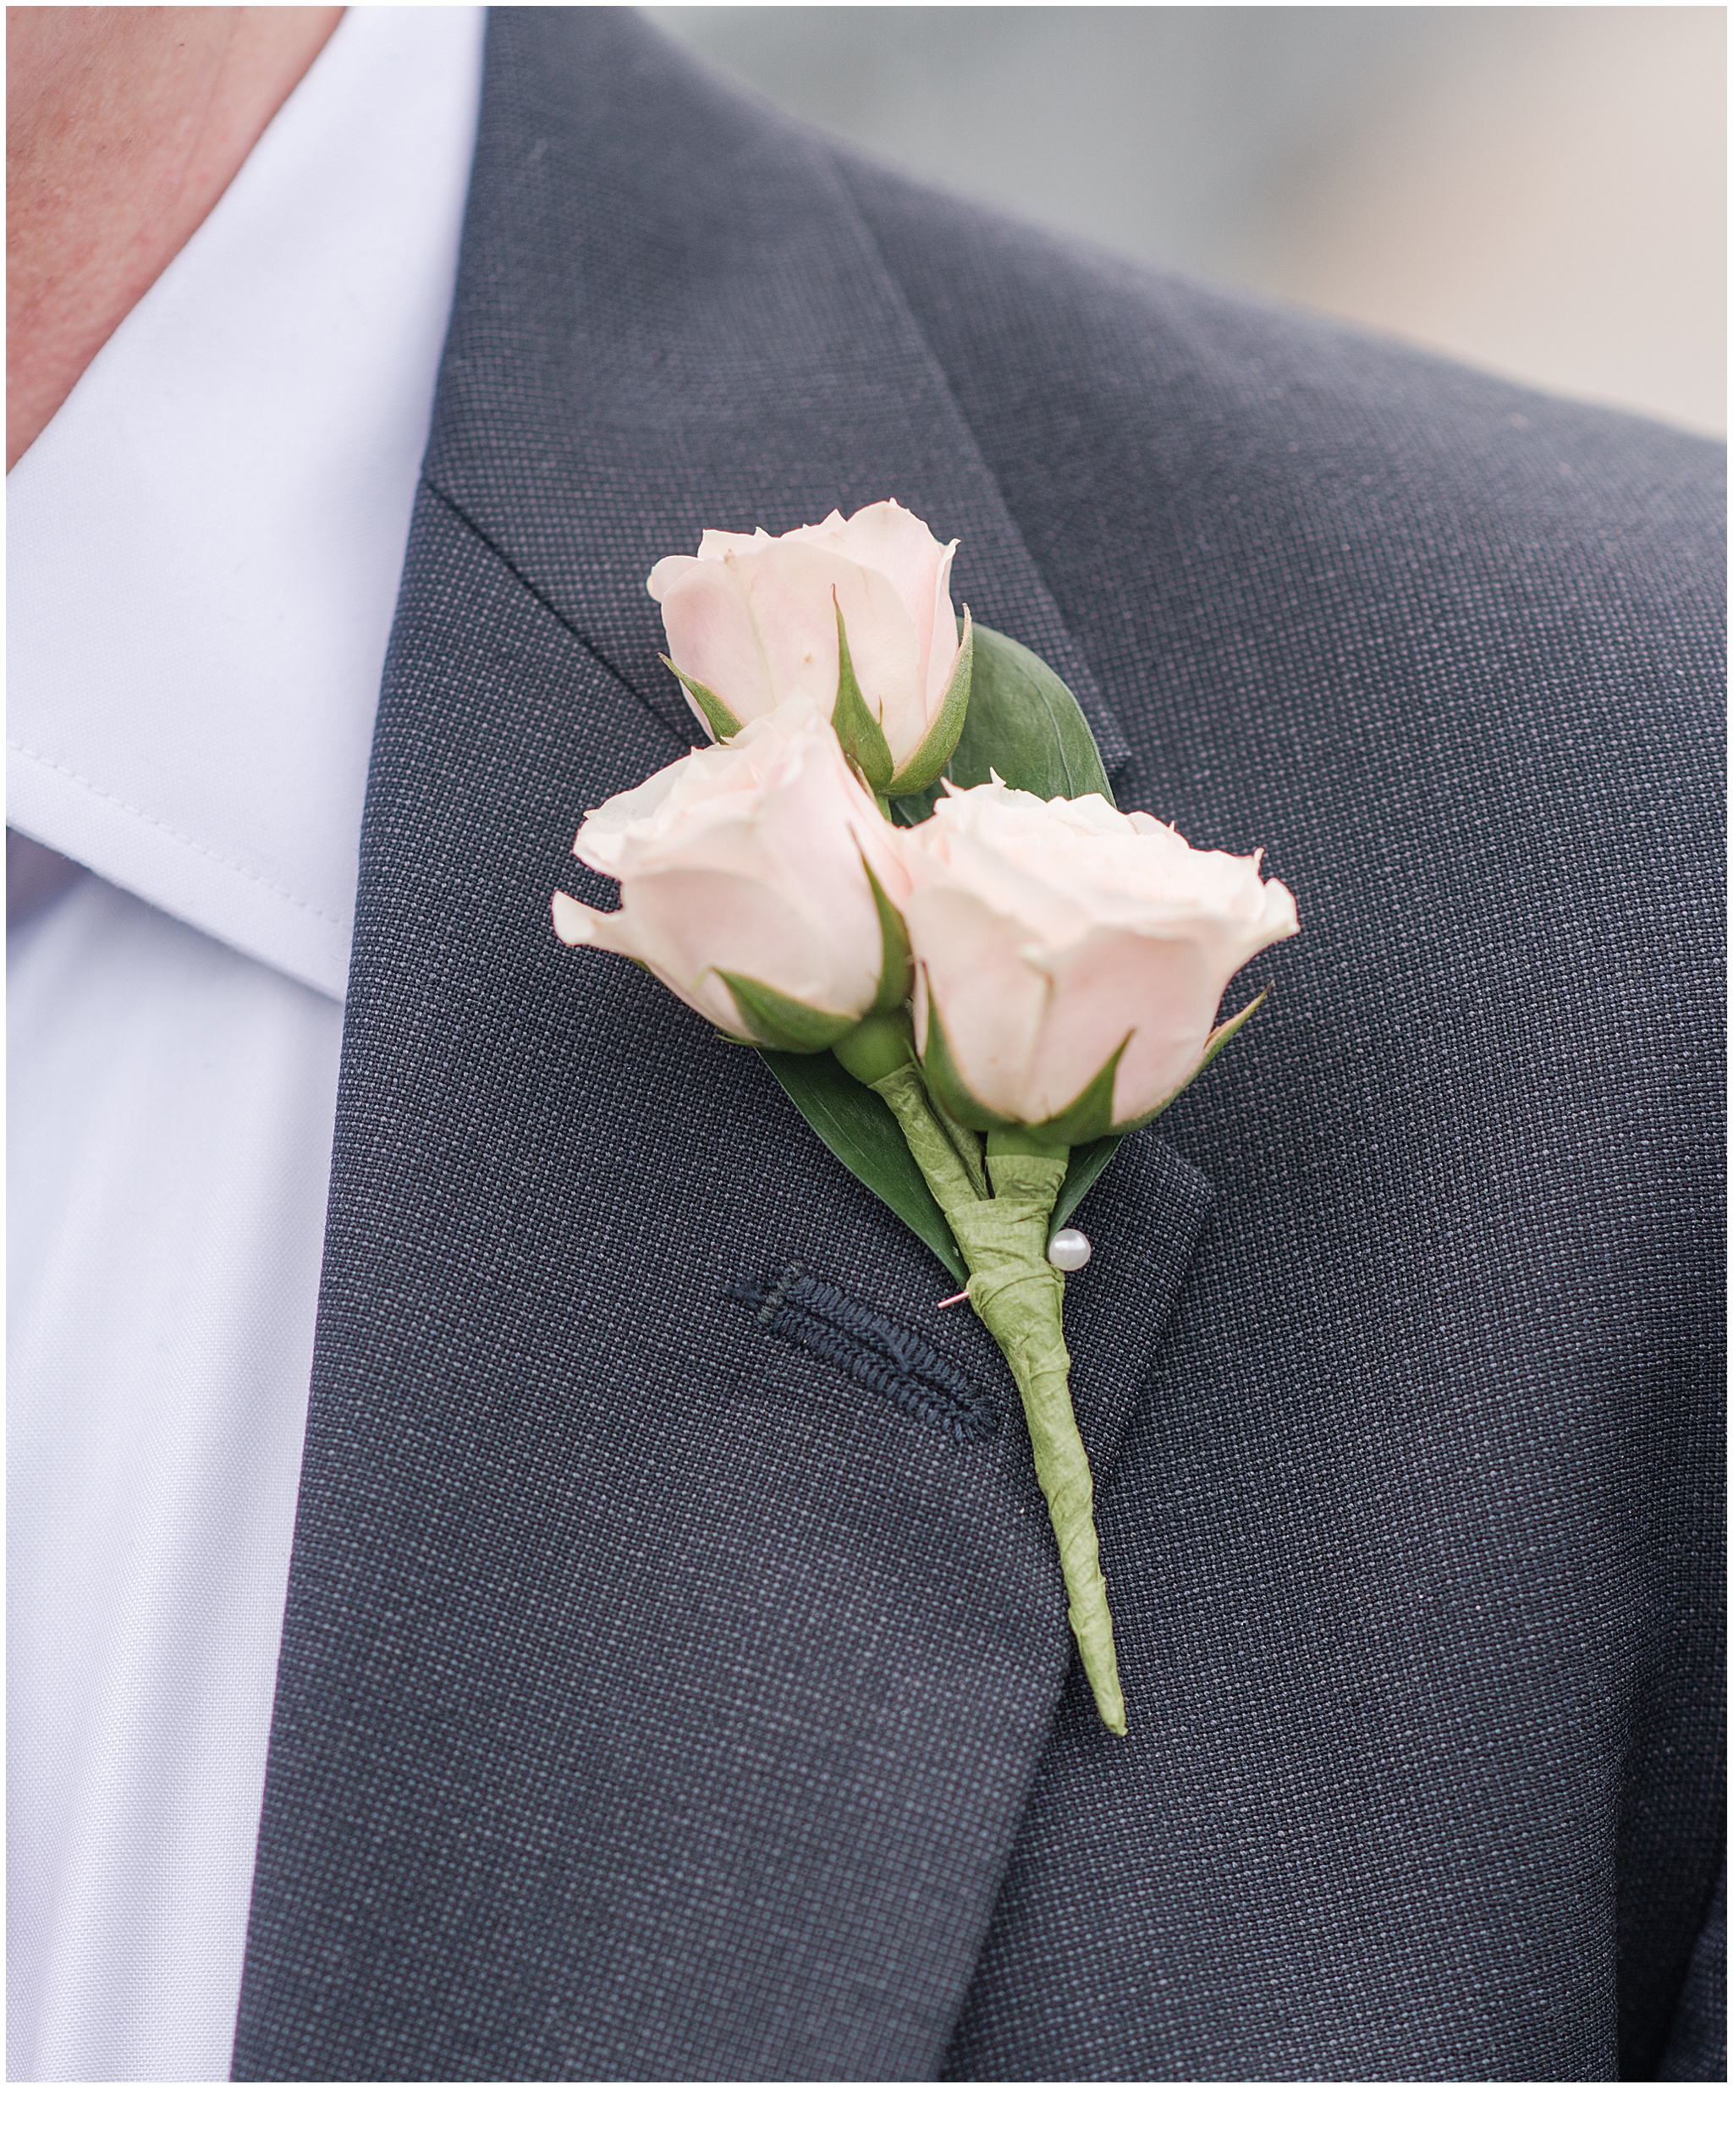 Pink boutonniere pinned on a gray suit.